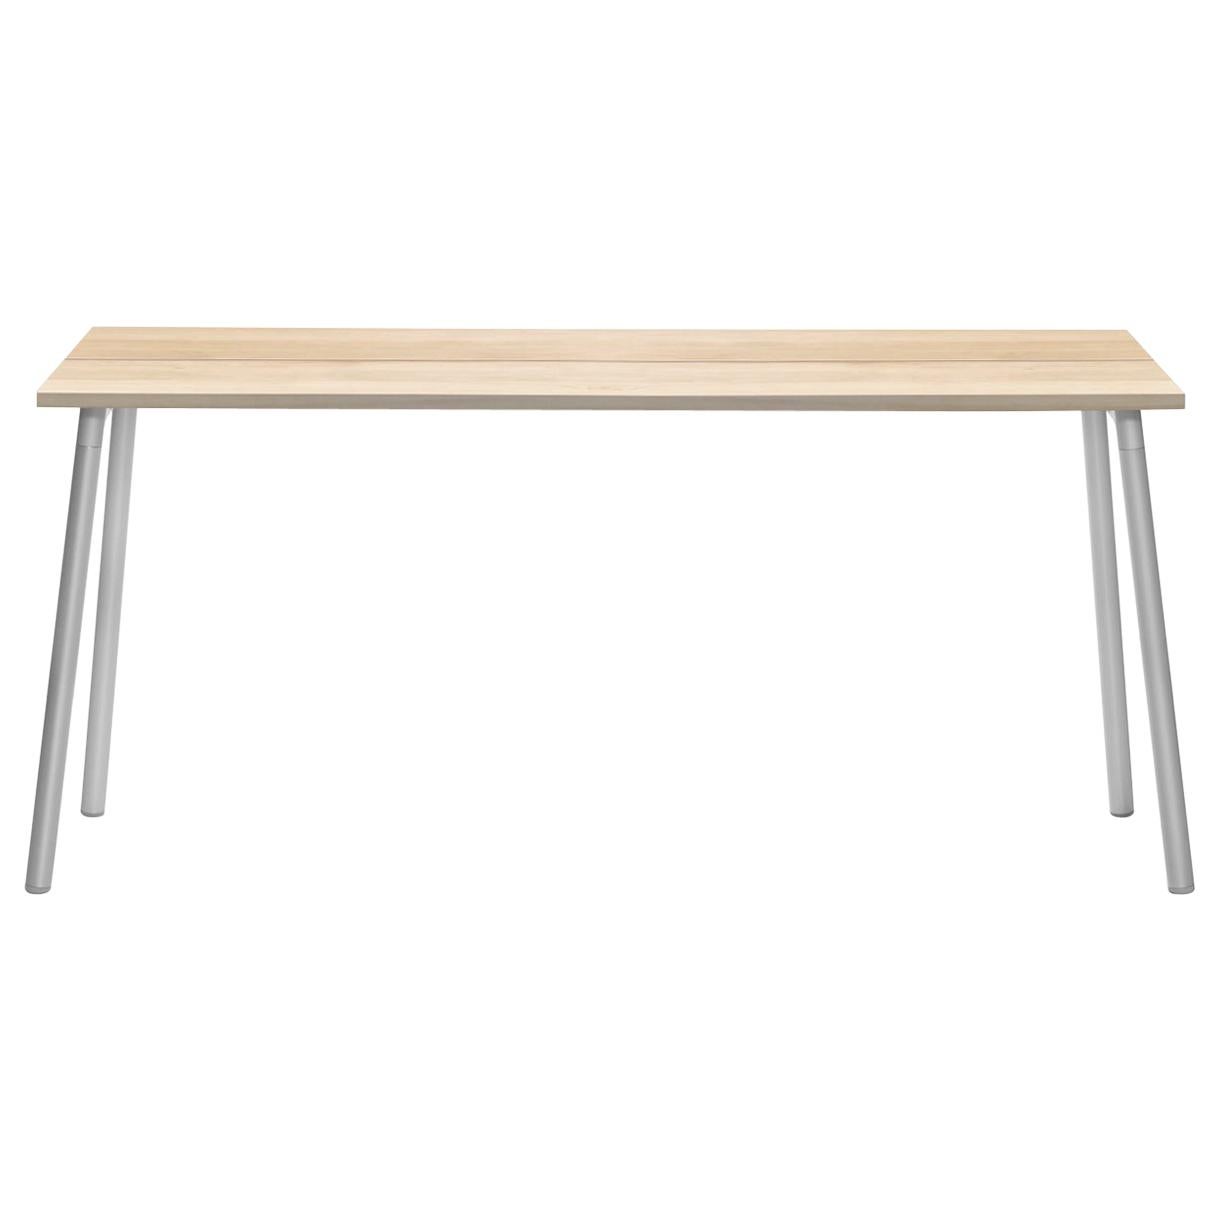 Emeco Run 62" Side Table Aluminum Frame & Wood Top by Sam Hecht and Kim Colin For Sale